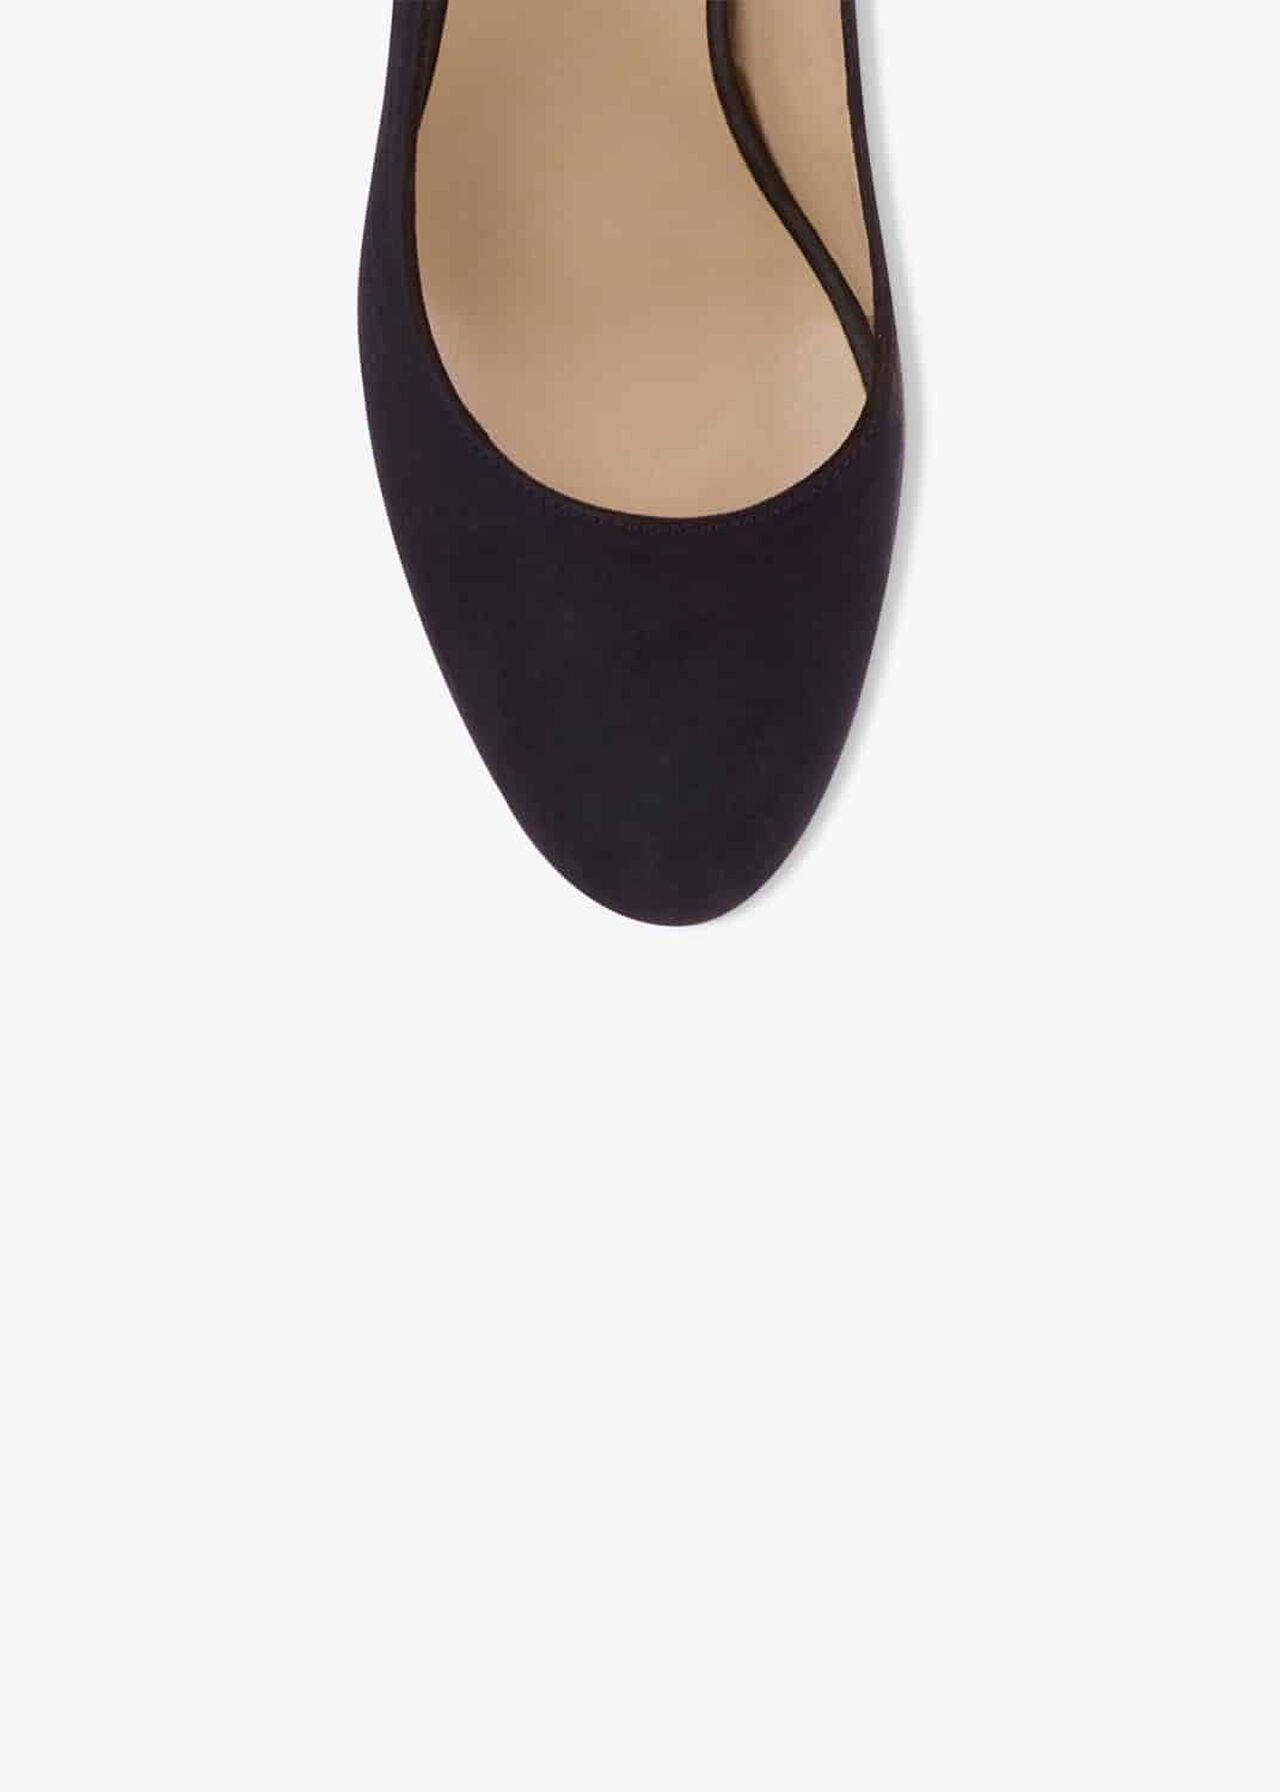 Sophia Leather Court Shoes